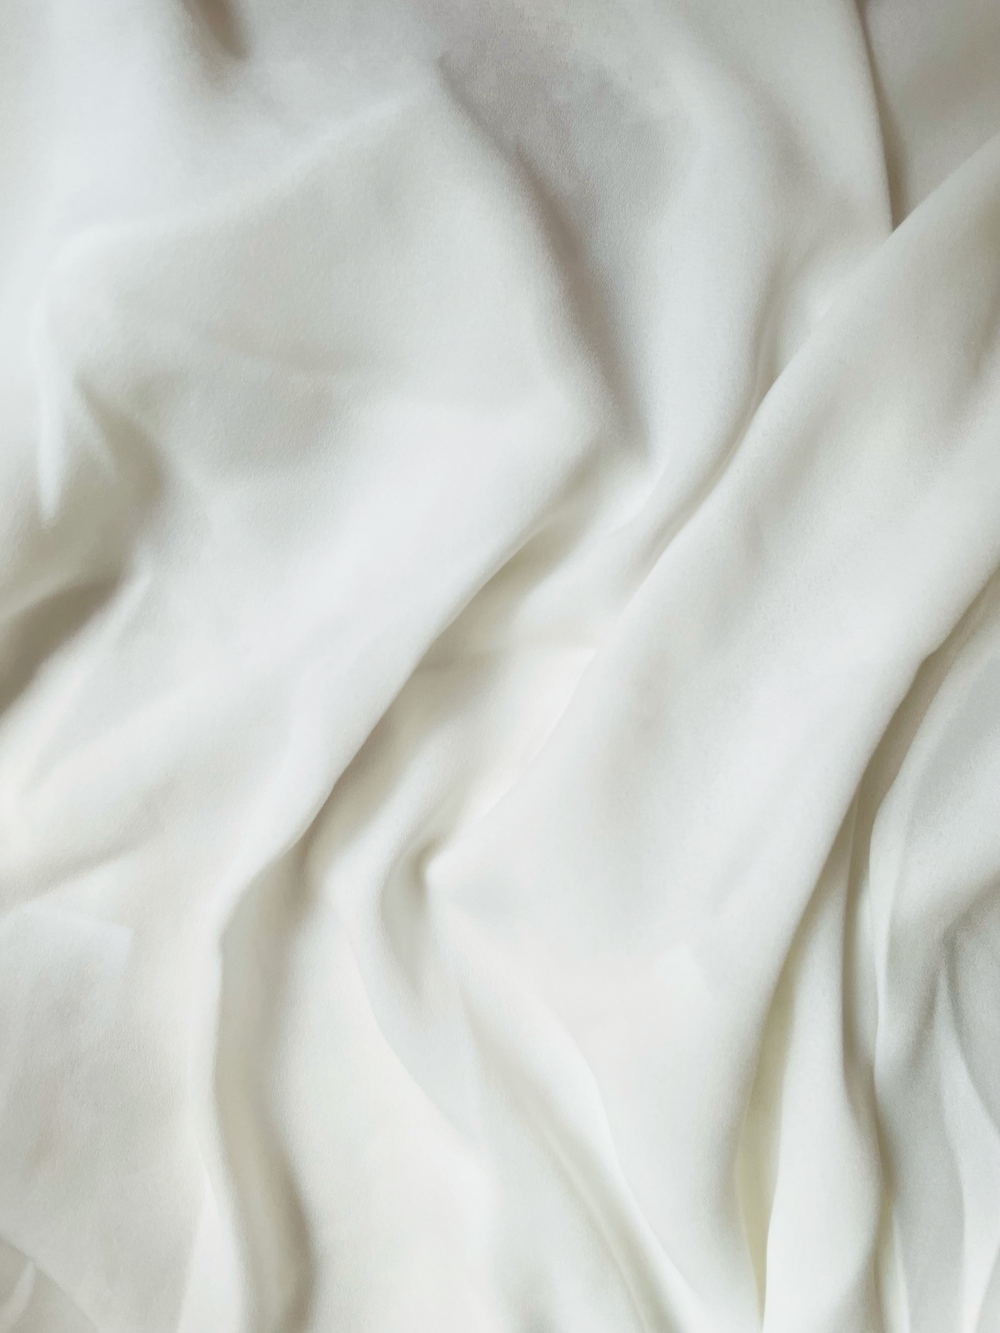 White Cloth Picture. Download Free Image